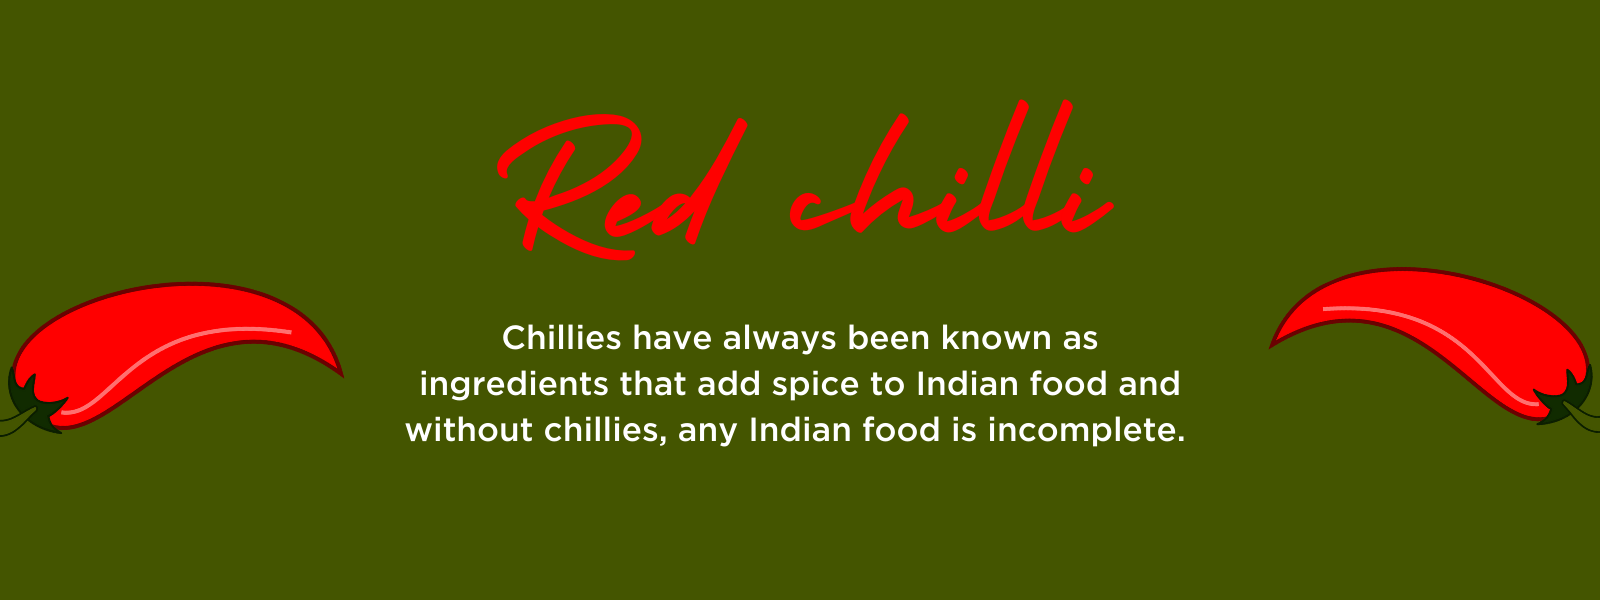 Red Chilli - Health Benefits, Uses and Important Facts